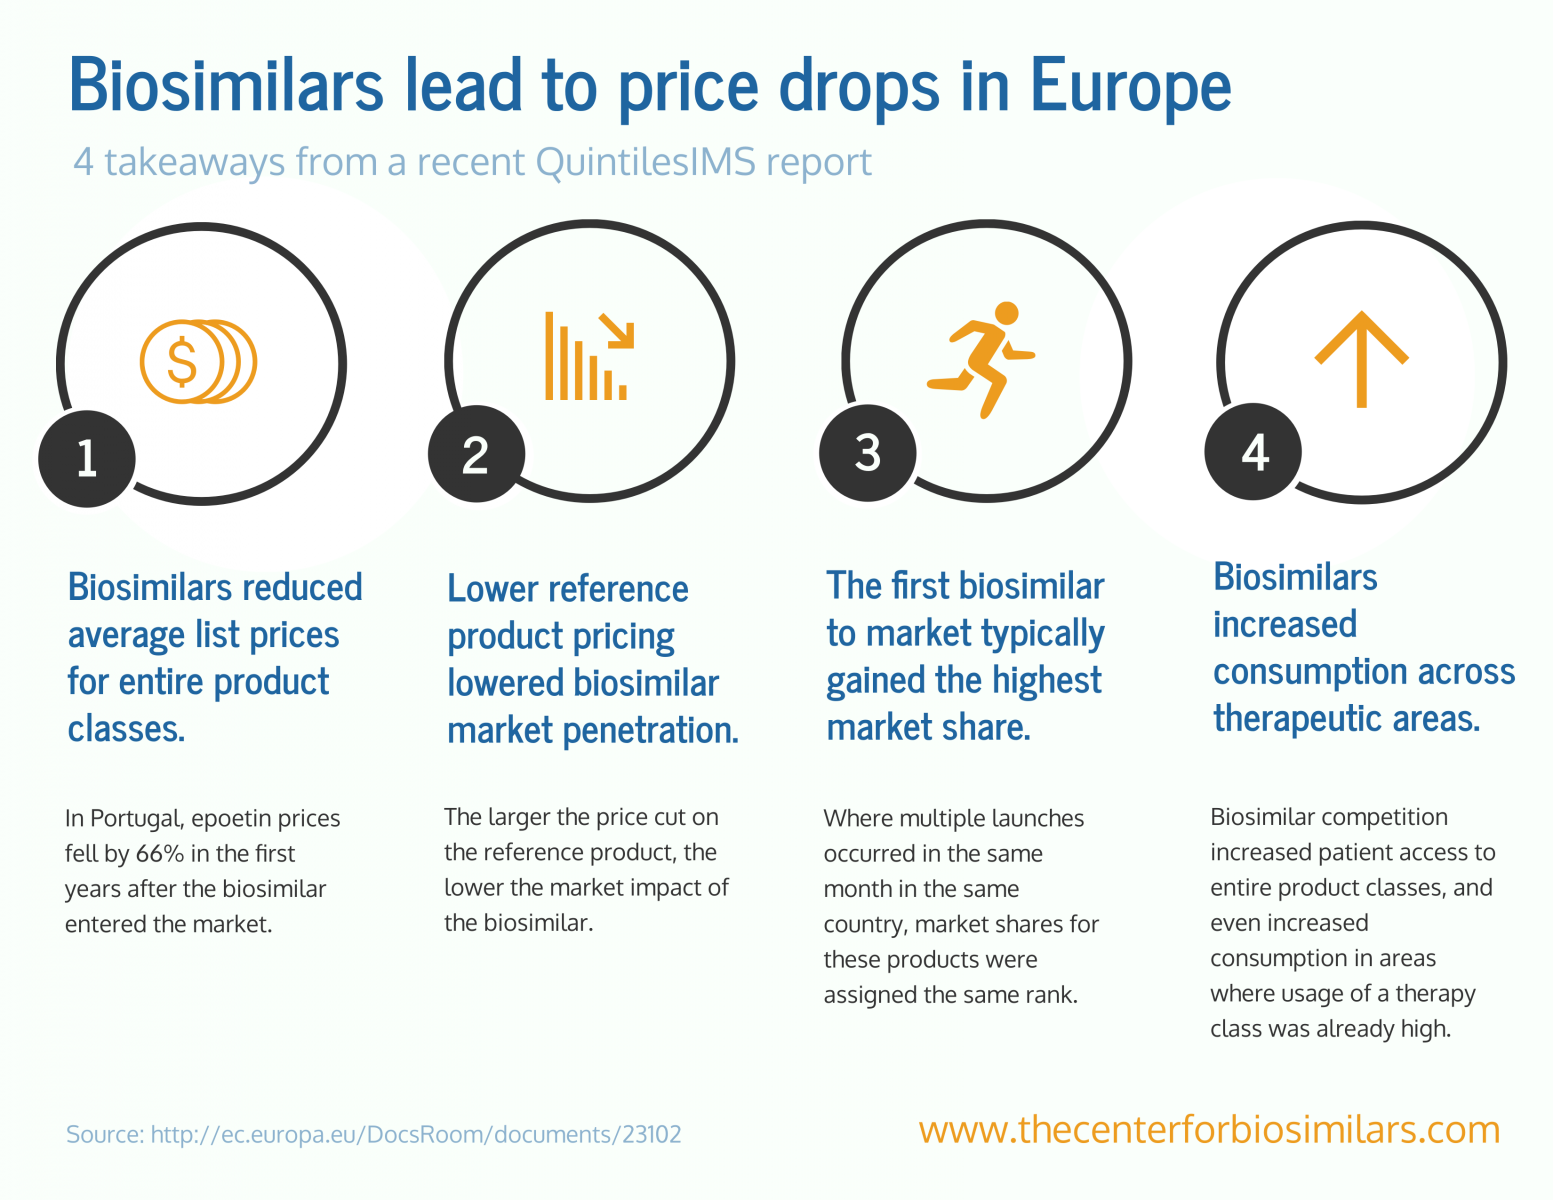 infographic detailing price drops as a result of biosimilars